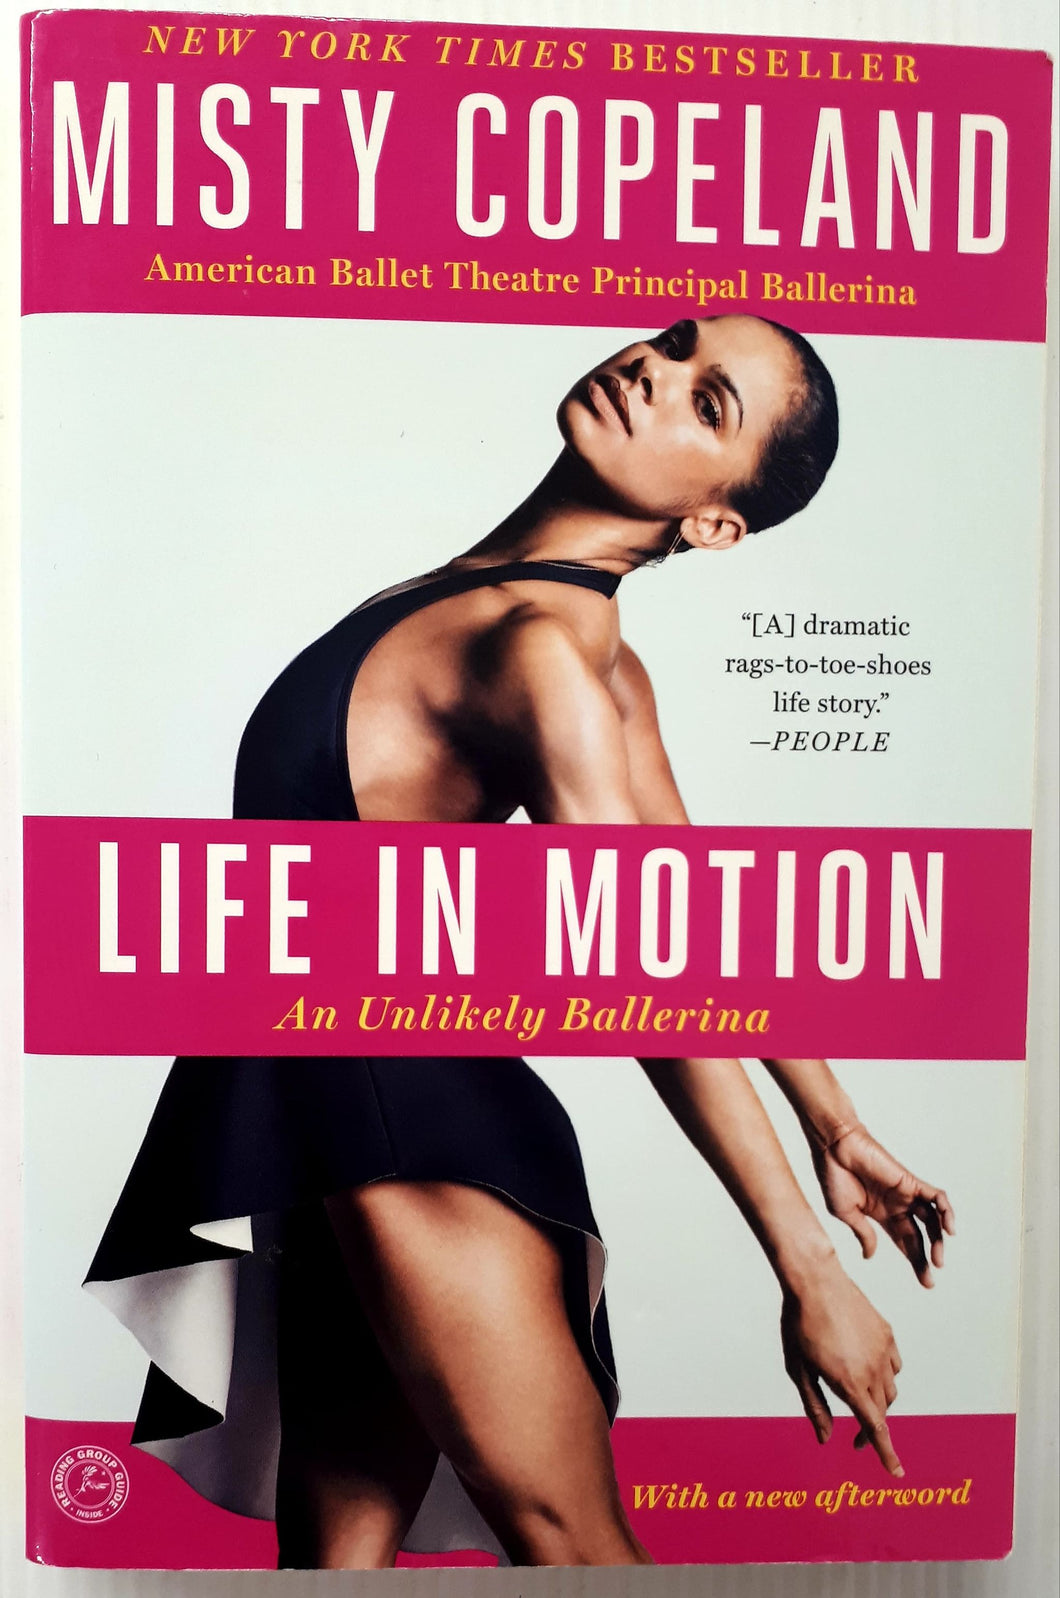 LIFE IN MOTION - Misty Copeland